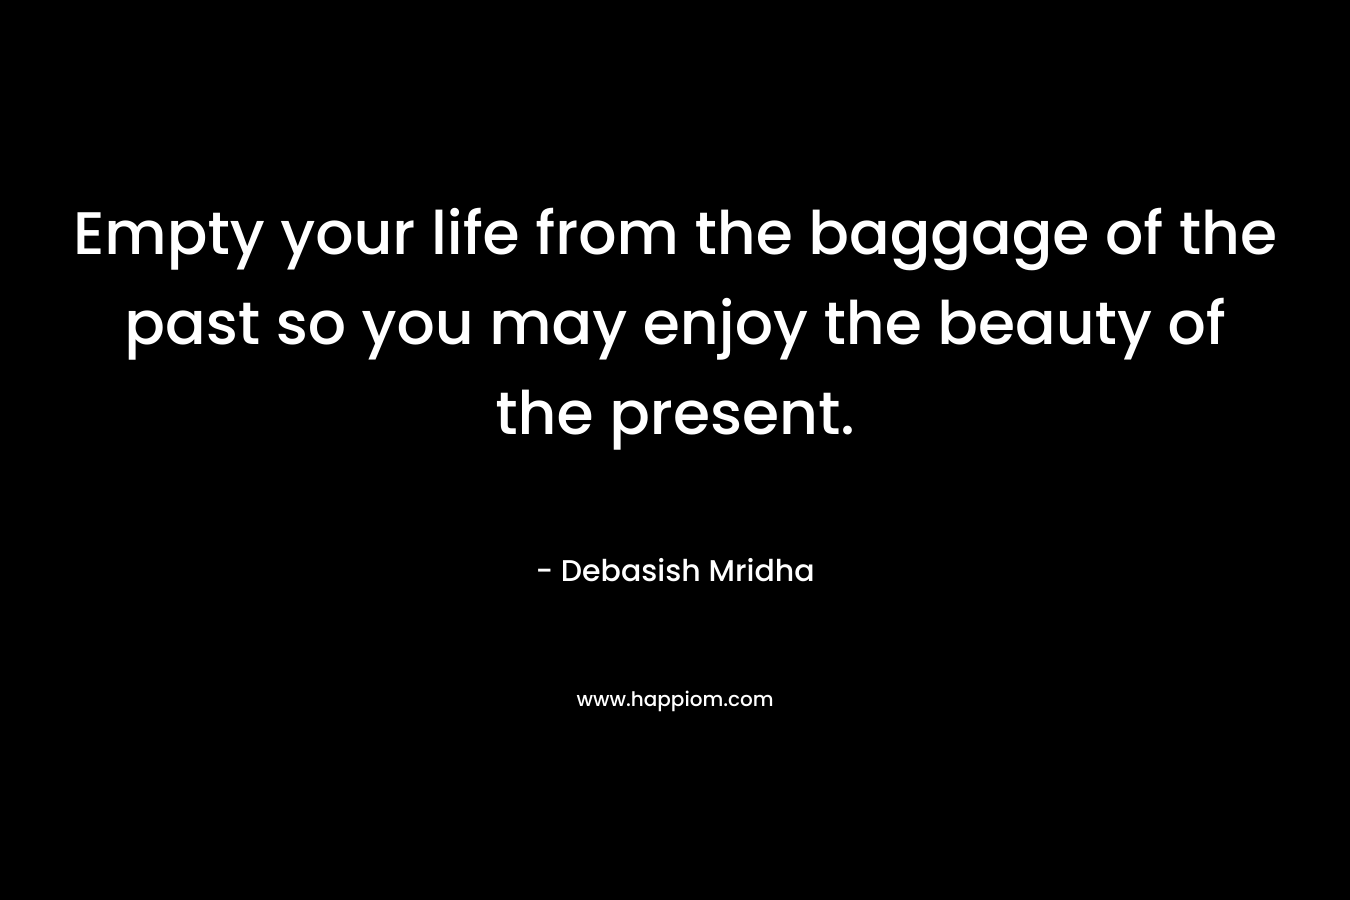 Empty your life from the baggage of the past so you may enjoy the beauty of the present.